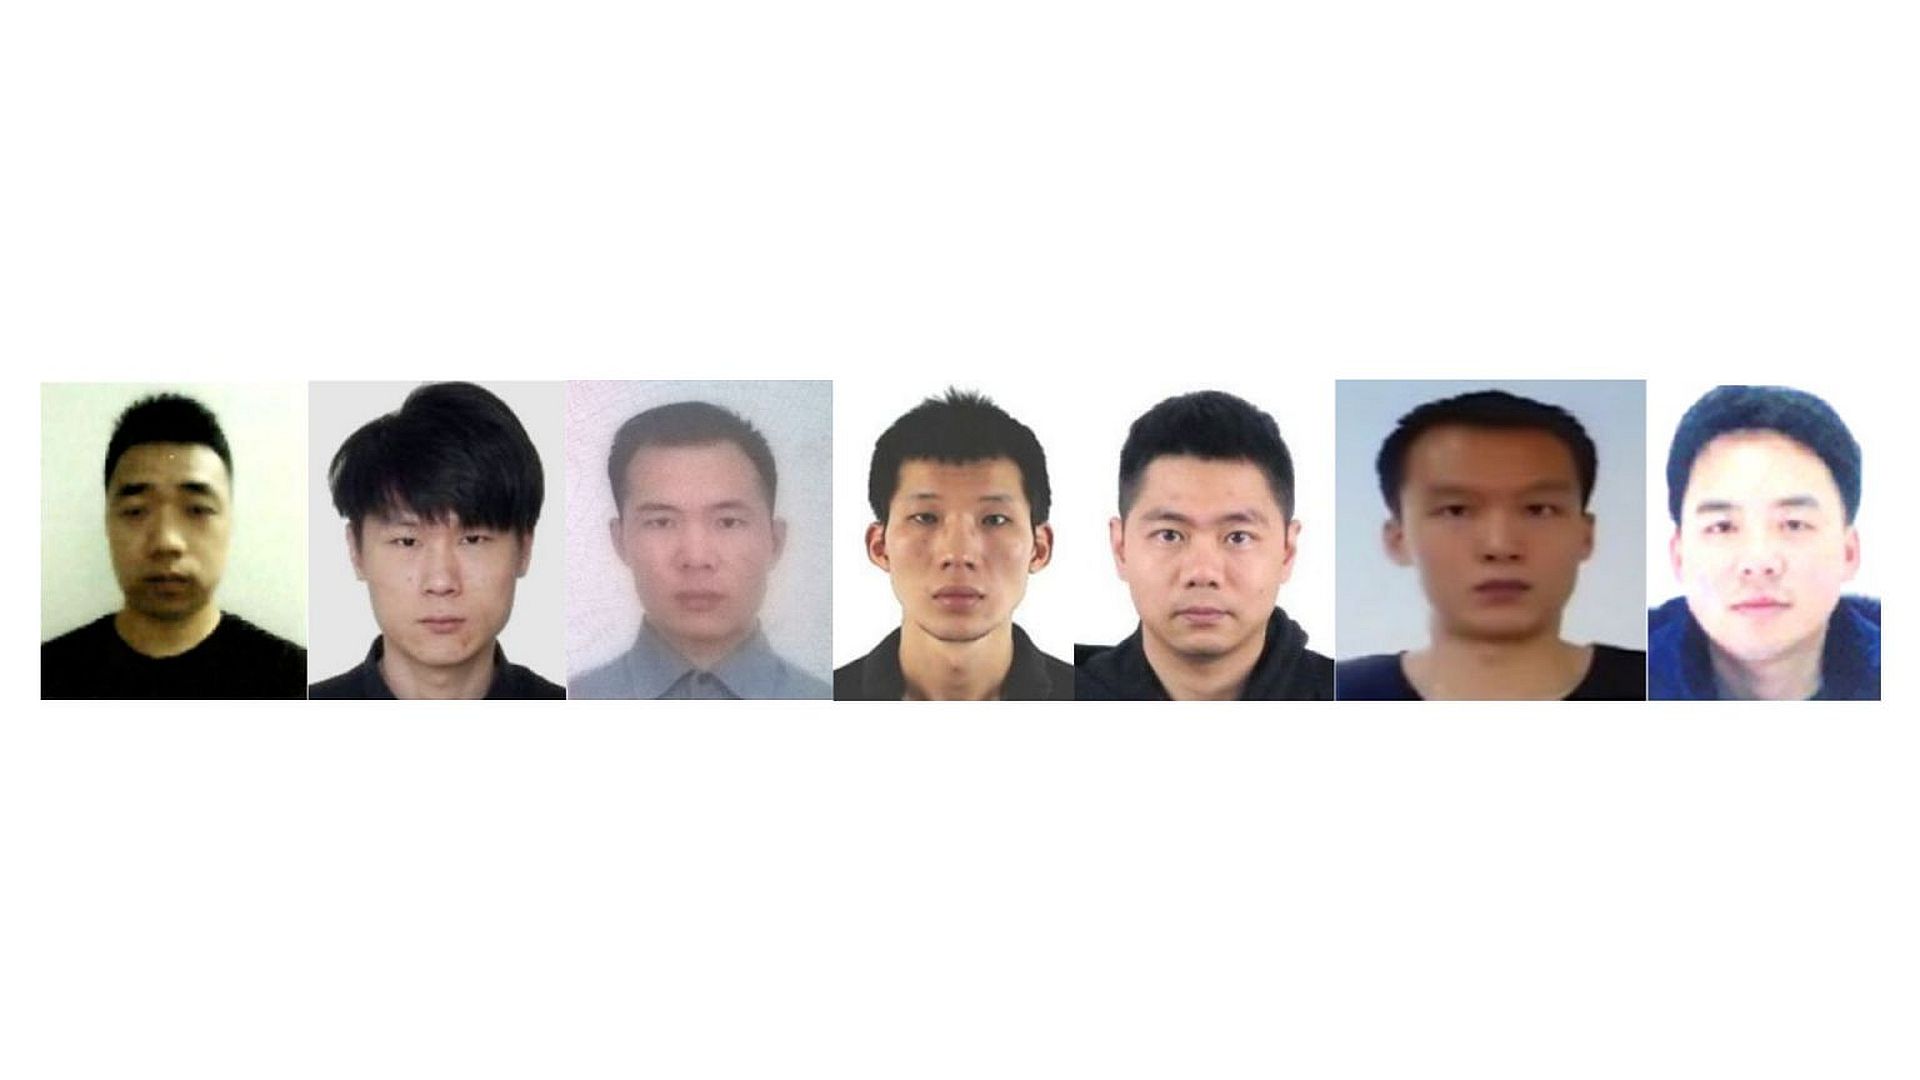 Seven suspects - $10 million reward: USA wants these Chinese hackers